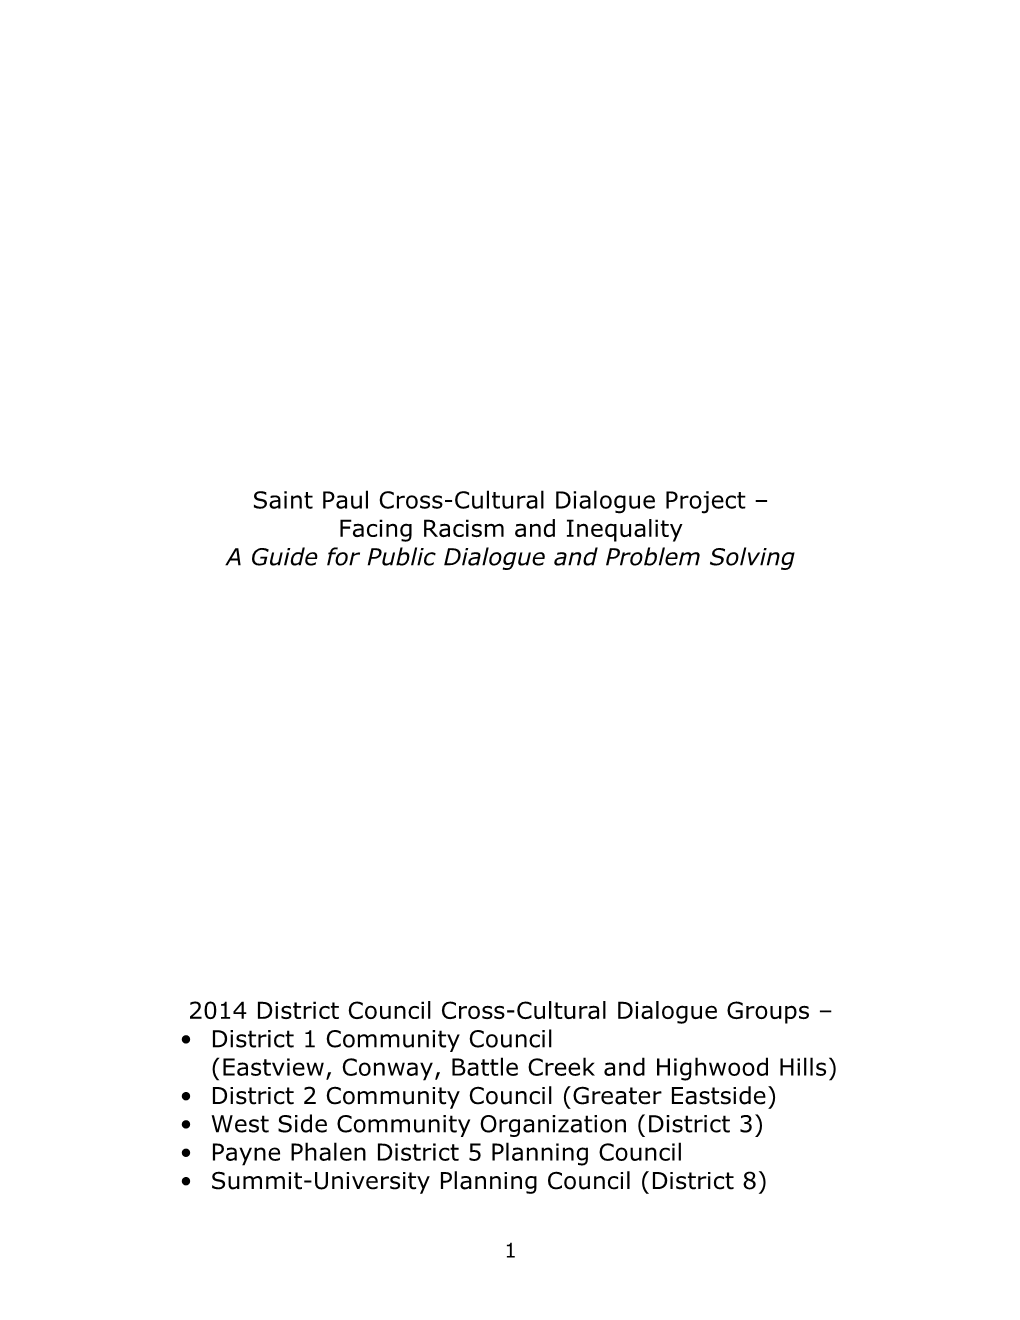 Saint Paul Cross-Cultural Dialogue Project – Facing Racism and Inequality a Guide for Public Dialogue and Problem Solving